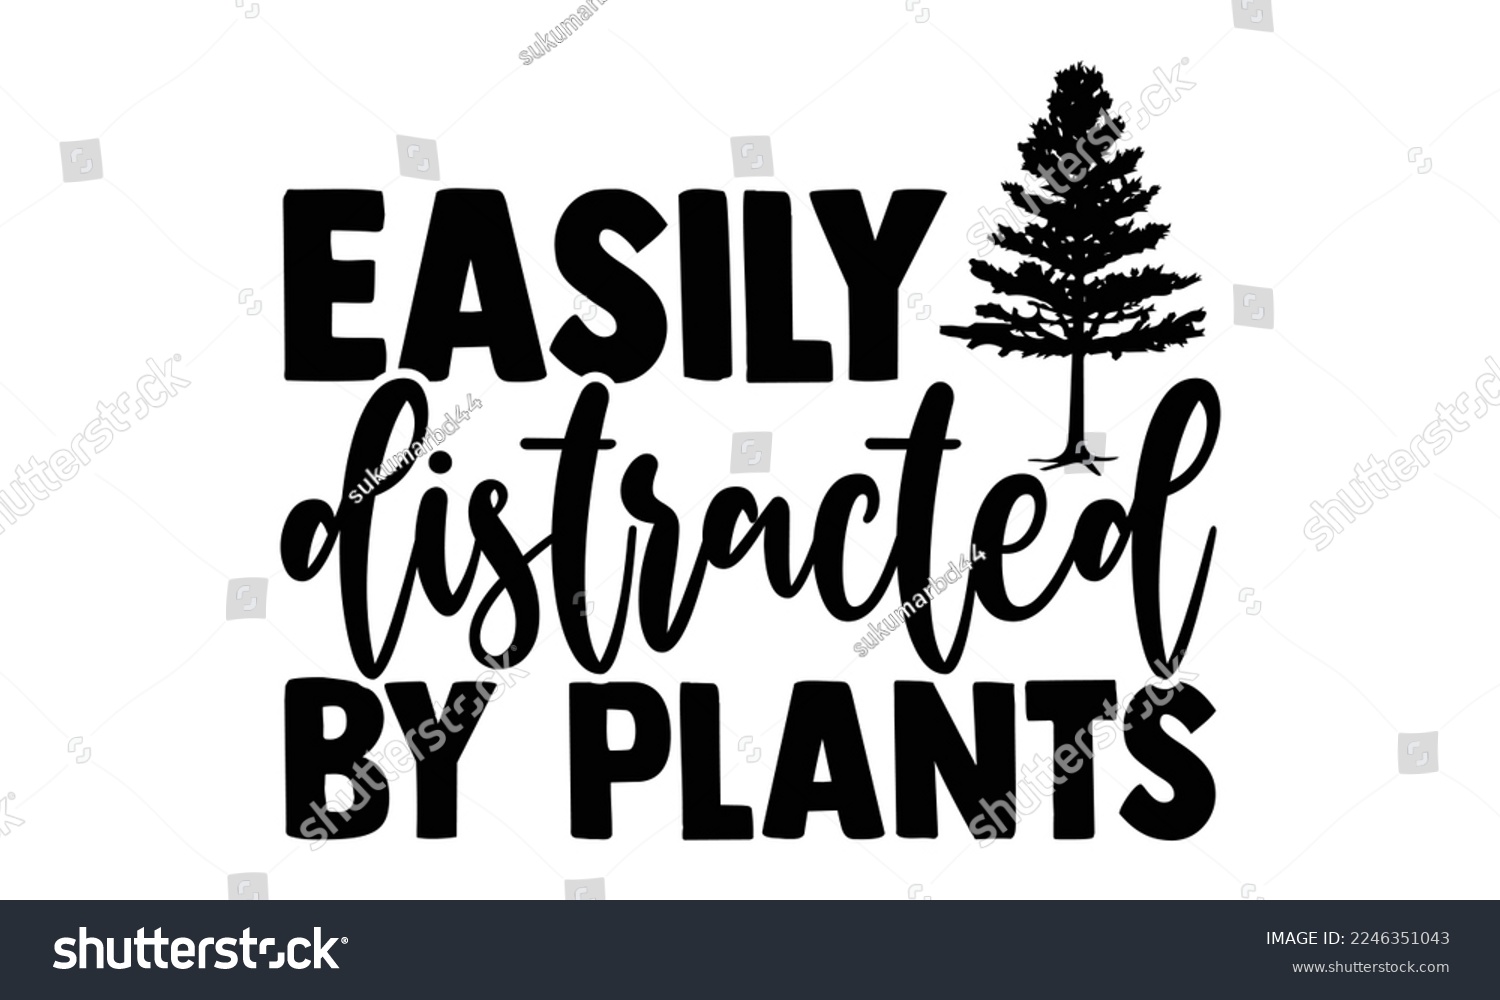 SVG of Easily Distracted By Plants - Gardening T-shirt Design, Illustration for prints on bags, posters, cards, mugs, svg for Cutting Machine, Silhouette Cameo and Hand drawn lettering phrase. svg